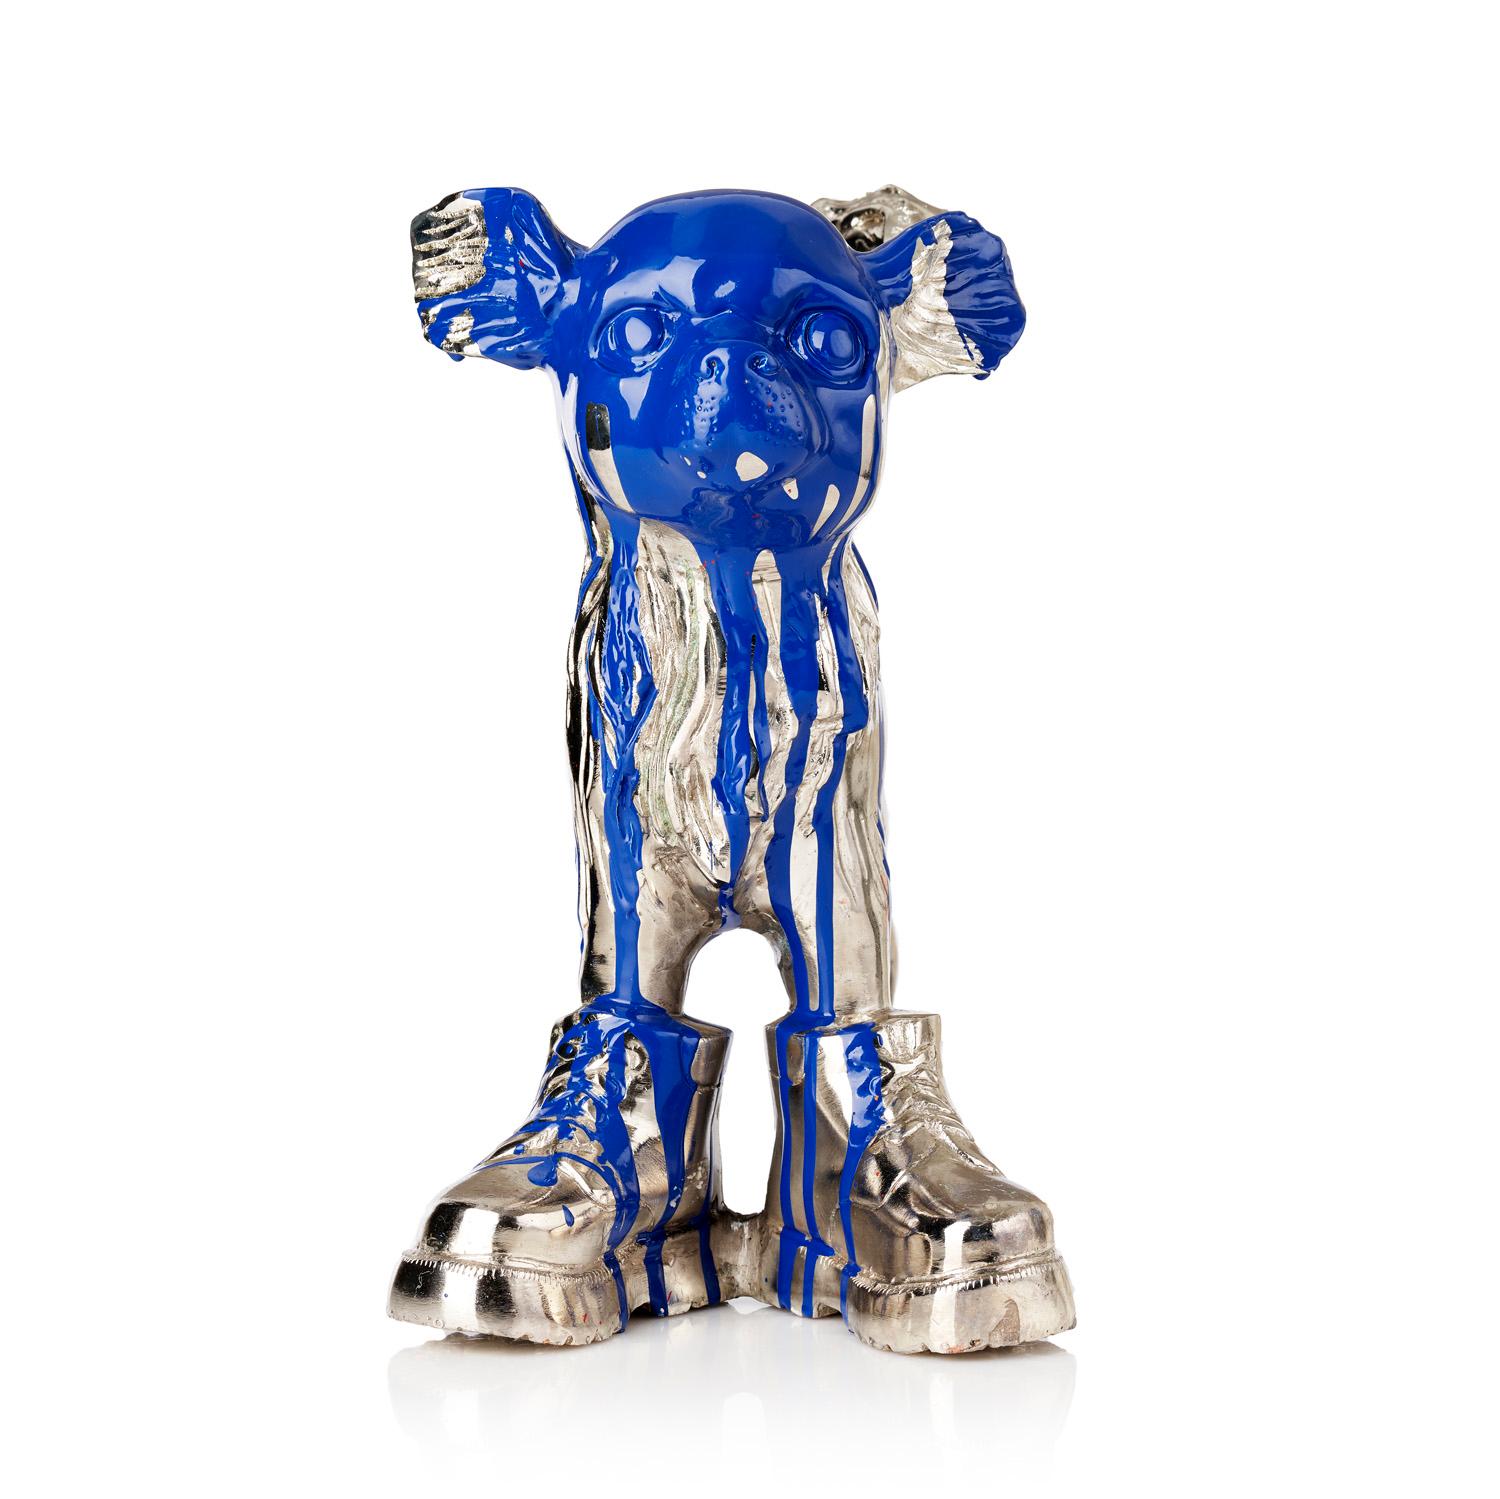 Cloned Chihuahua with colored head blue - Sculpture by William Sweetlove